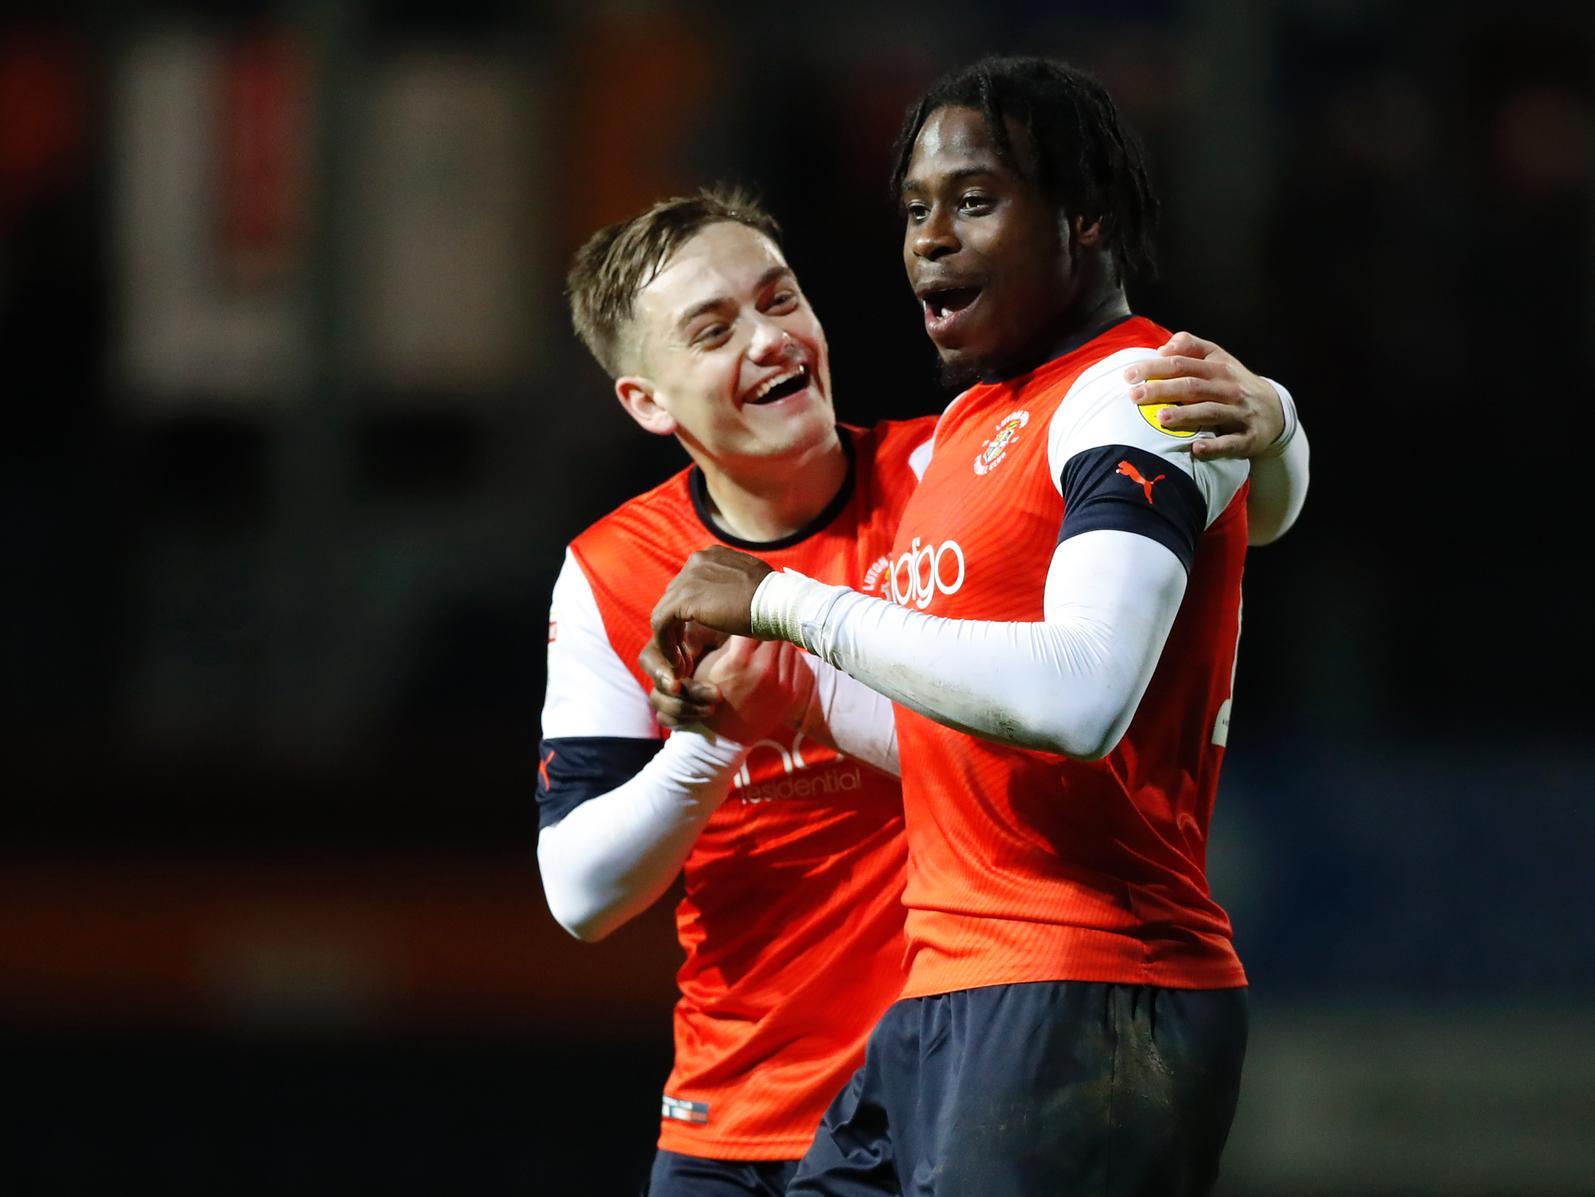 My word, they were due a win! The Hatters fans were simply delighted to end their five-game losing streak, with a vital 2-1 victory over the rapidly sinking Charlton Athletic.